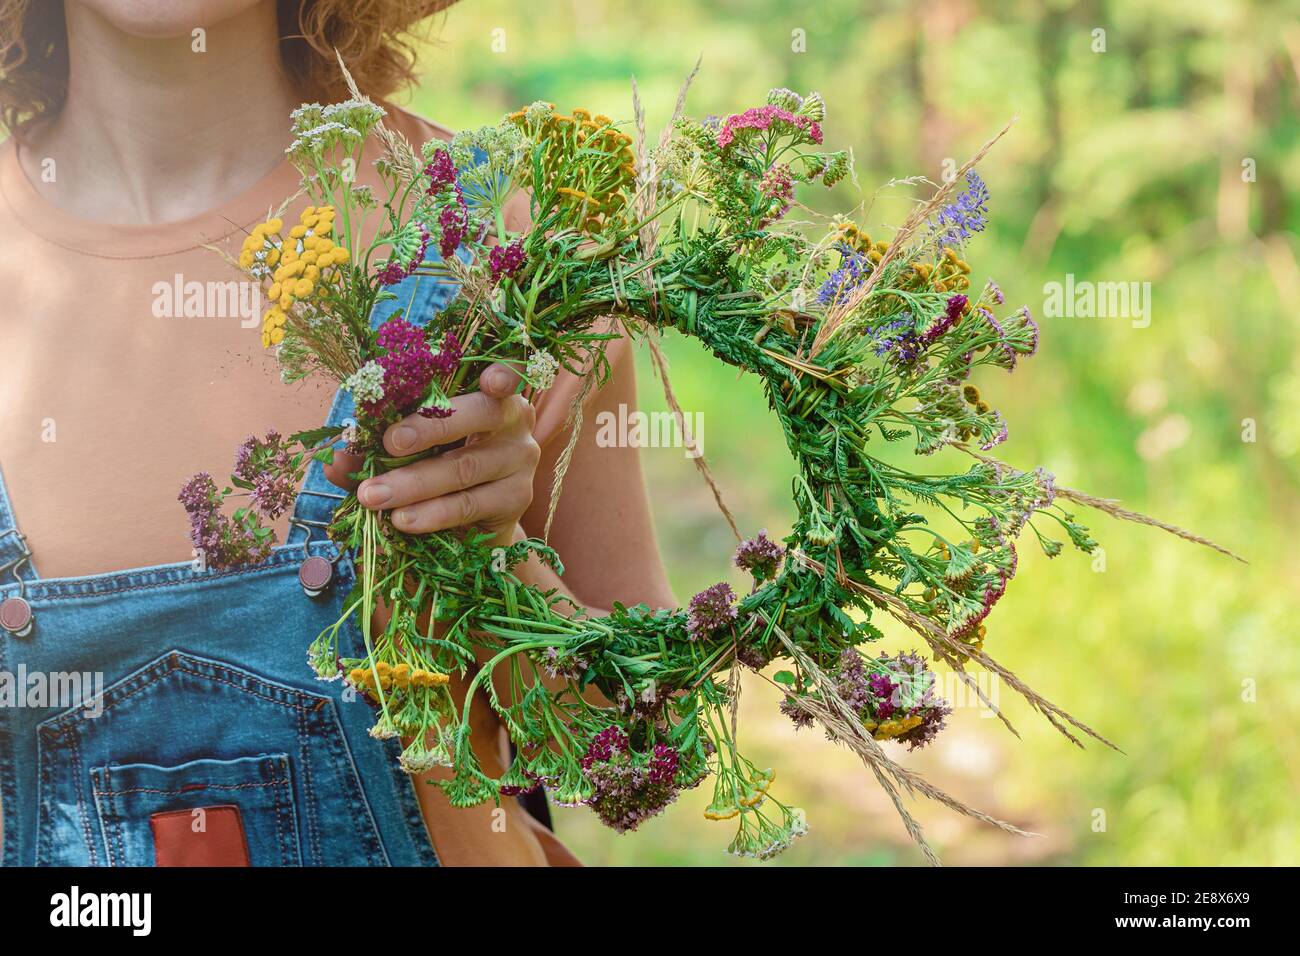 Woman in denim overalls holds a wreath of forest flowers. Close up. Forest background Stock Photo